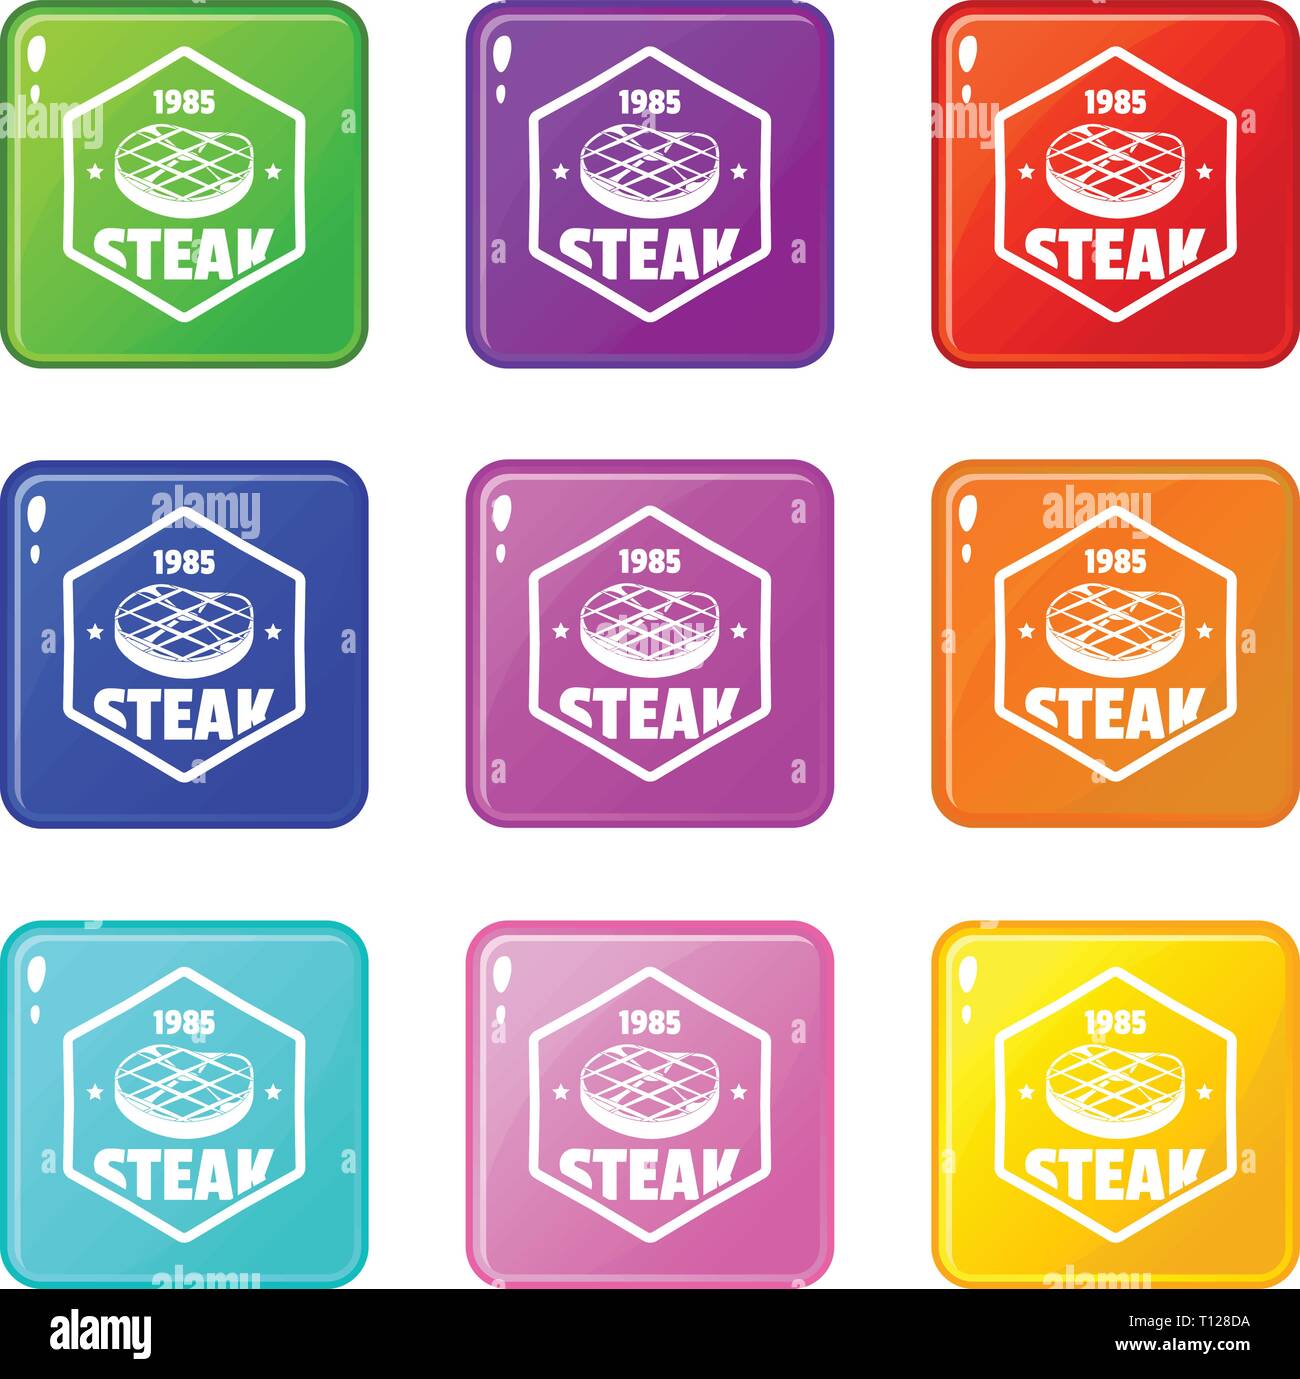 1985 steak icons set 9 color collection Stock Vector